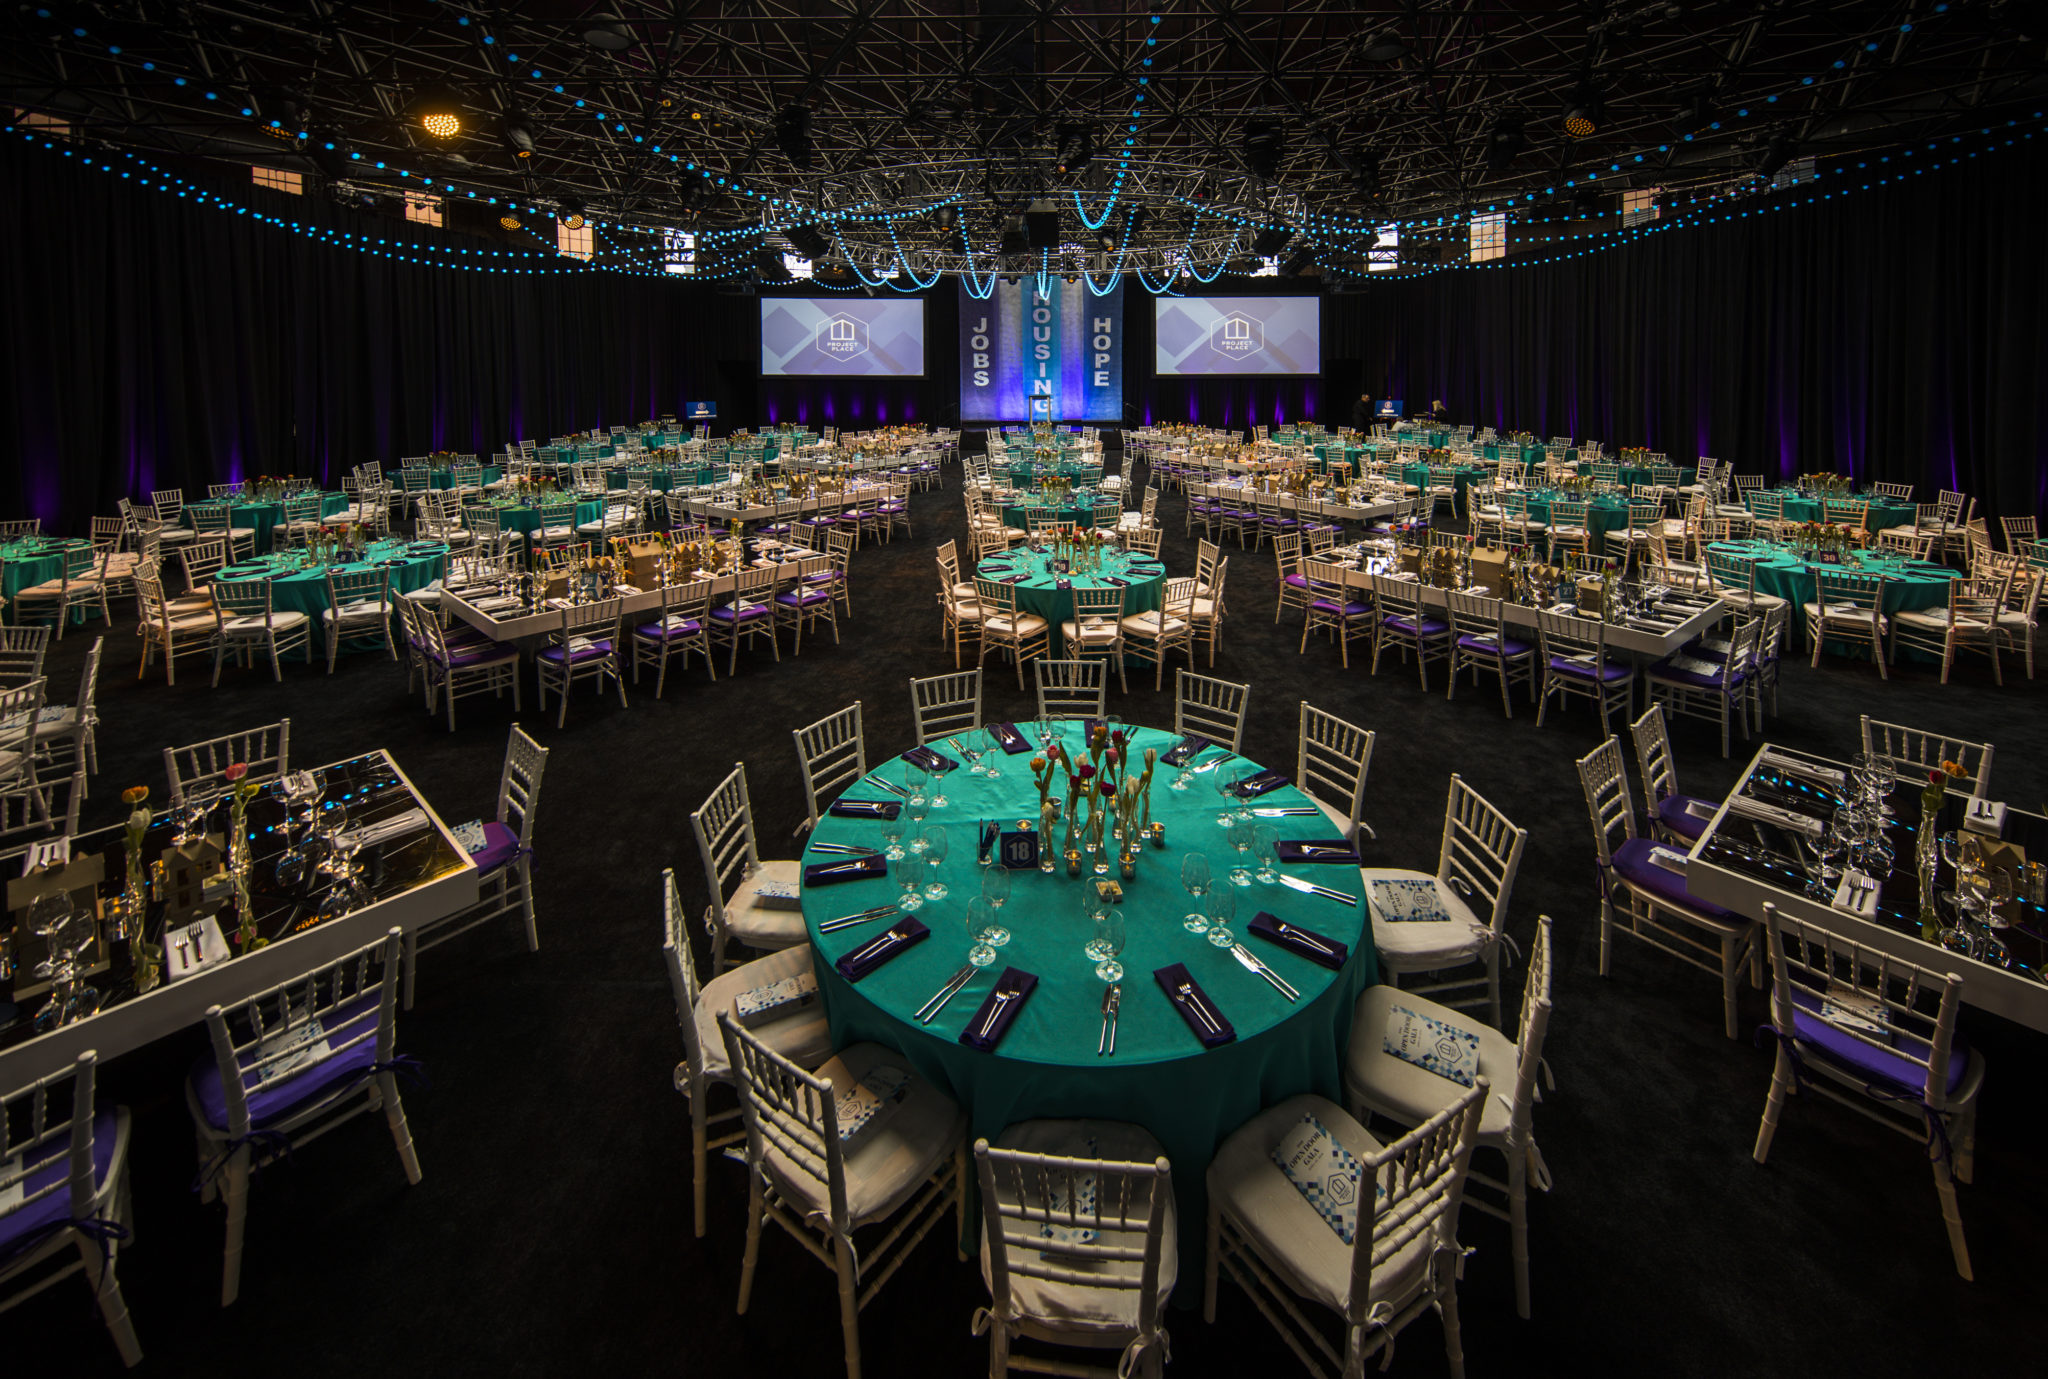 wide shot of our open door gala venue, outfitted with tables and bright decorations